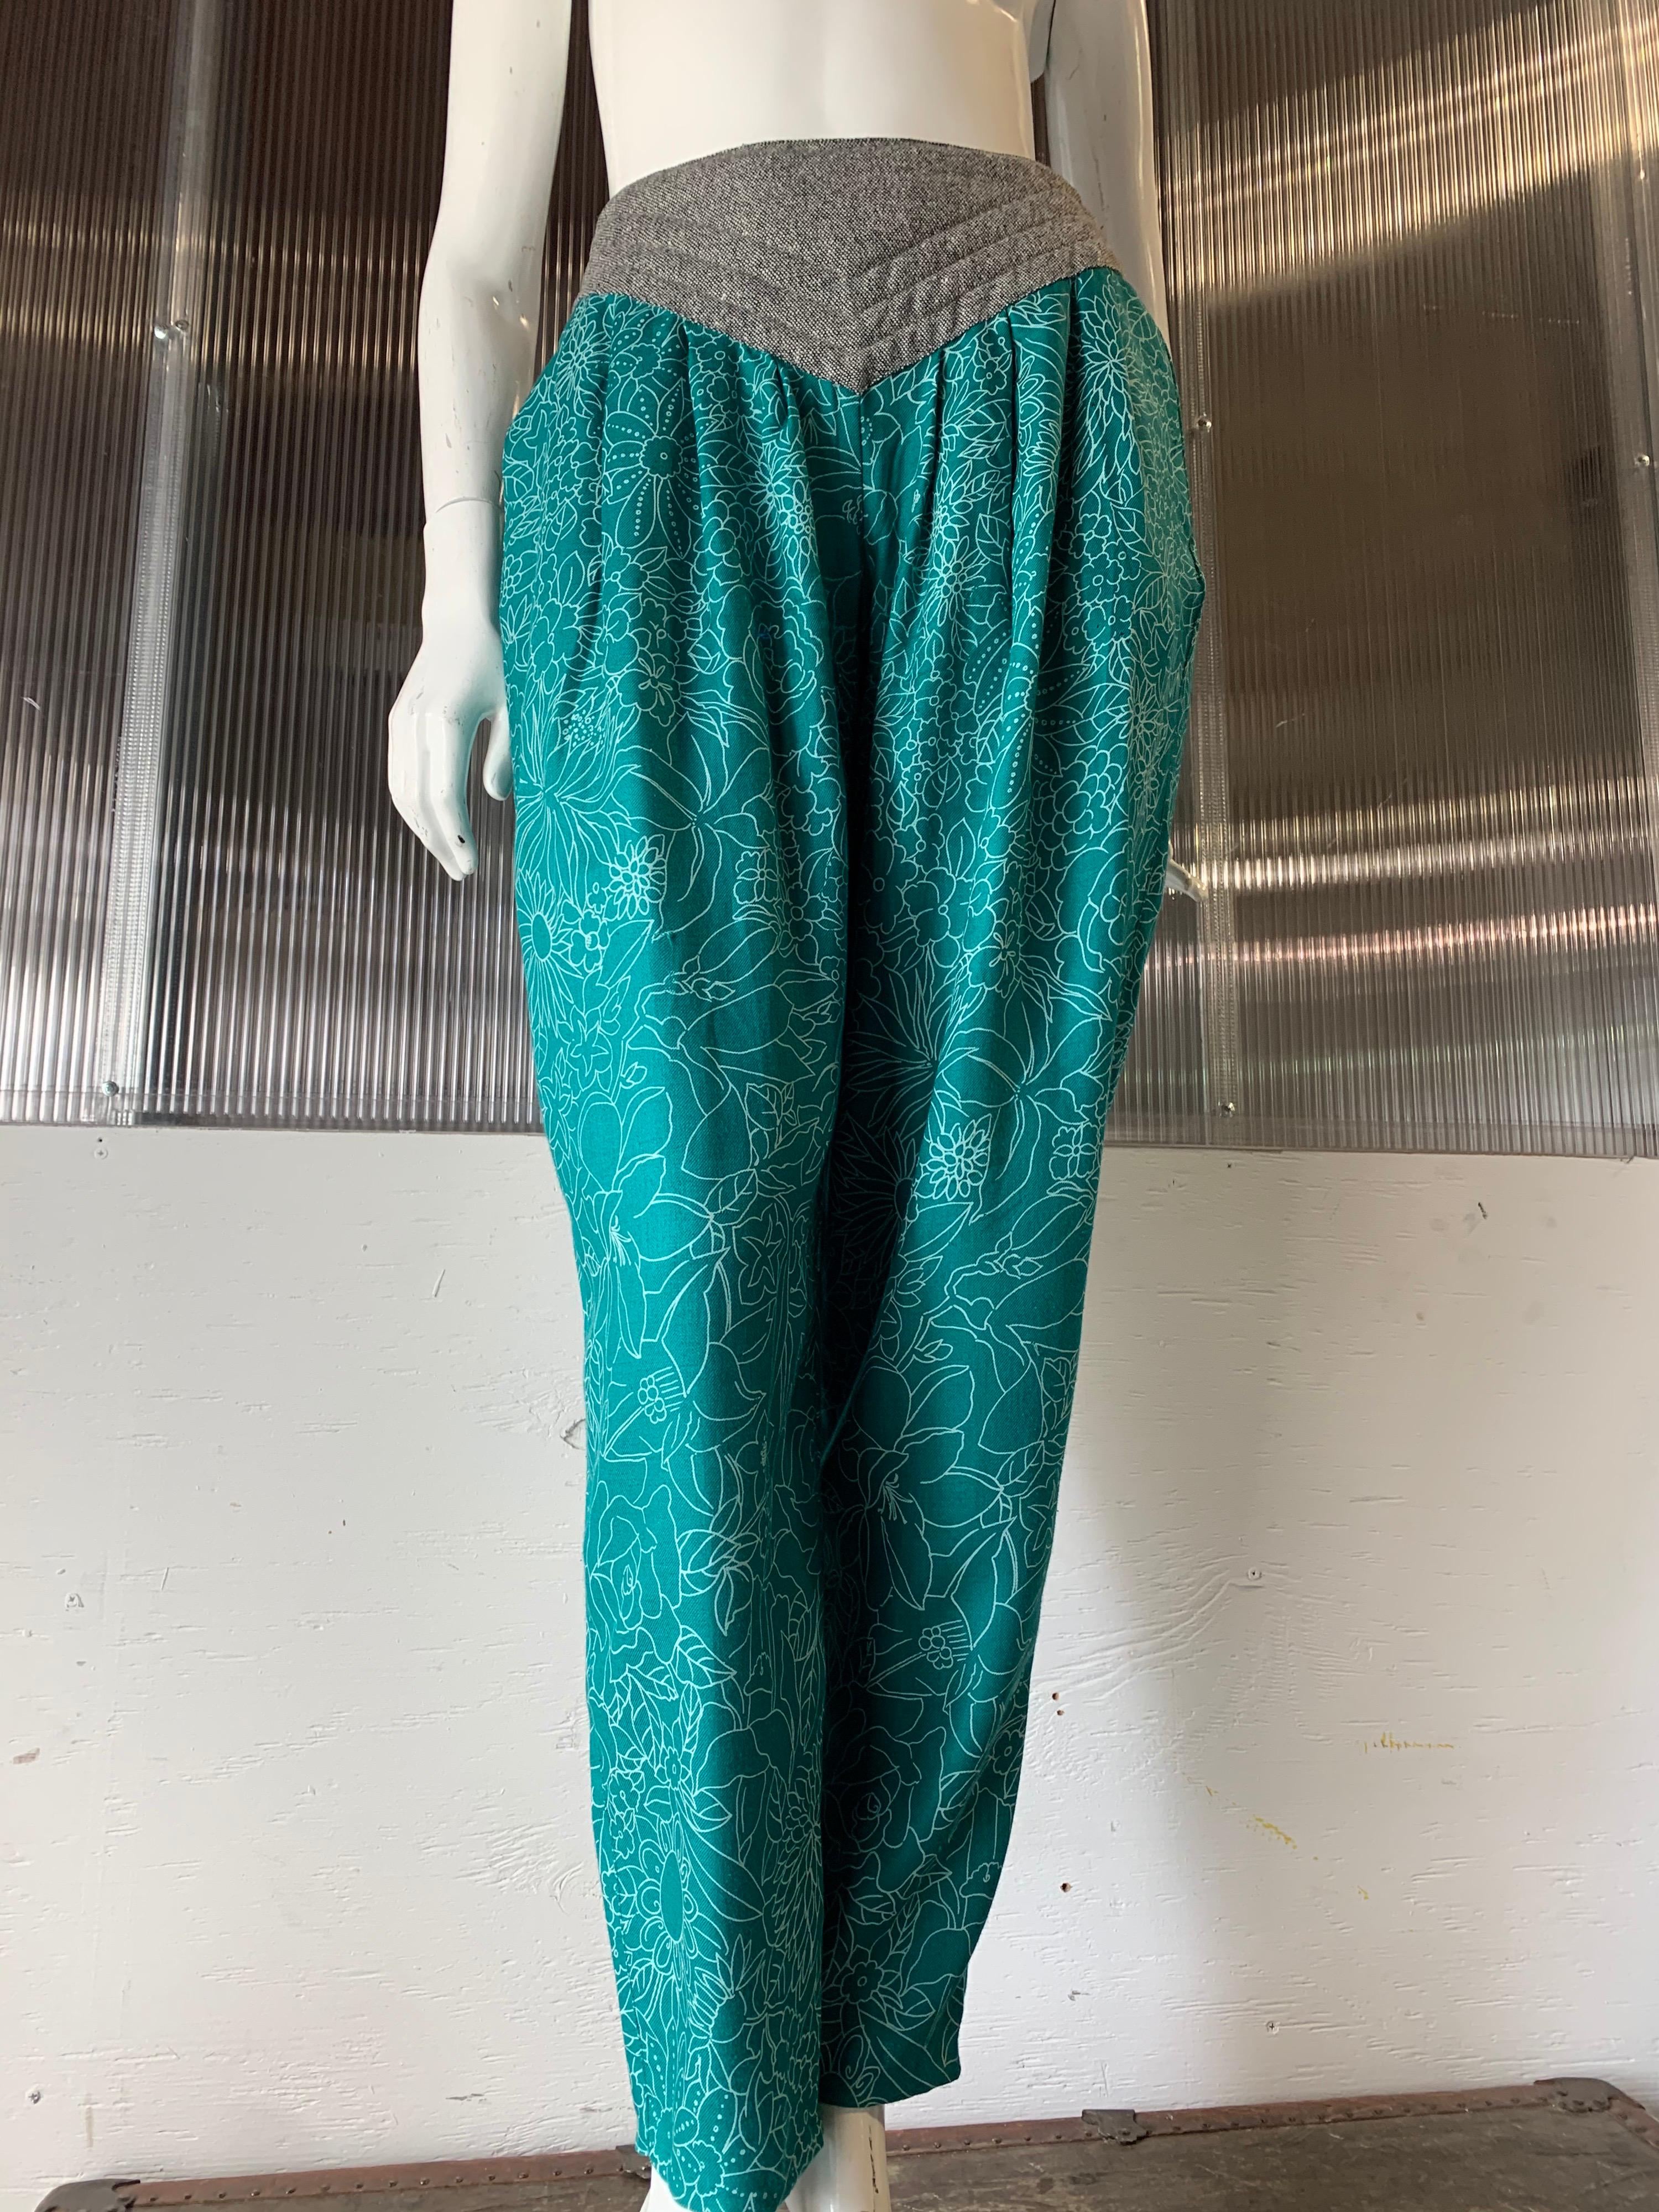 1980s Gianni Versace harem-style silk pants in a teal and white floral print:  pleated at the waist, tapering to a straight cropped ankle. Waistband is black and white trapunto-stitched wool and peaked at front. Italian size 40. US size 6. 